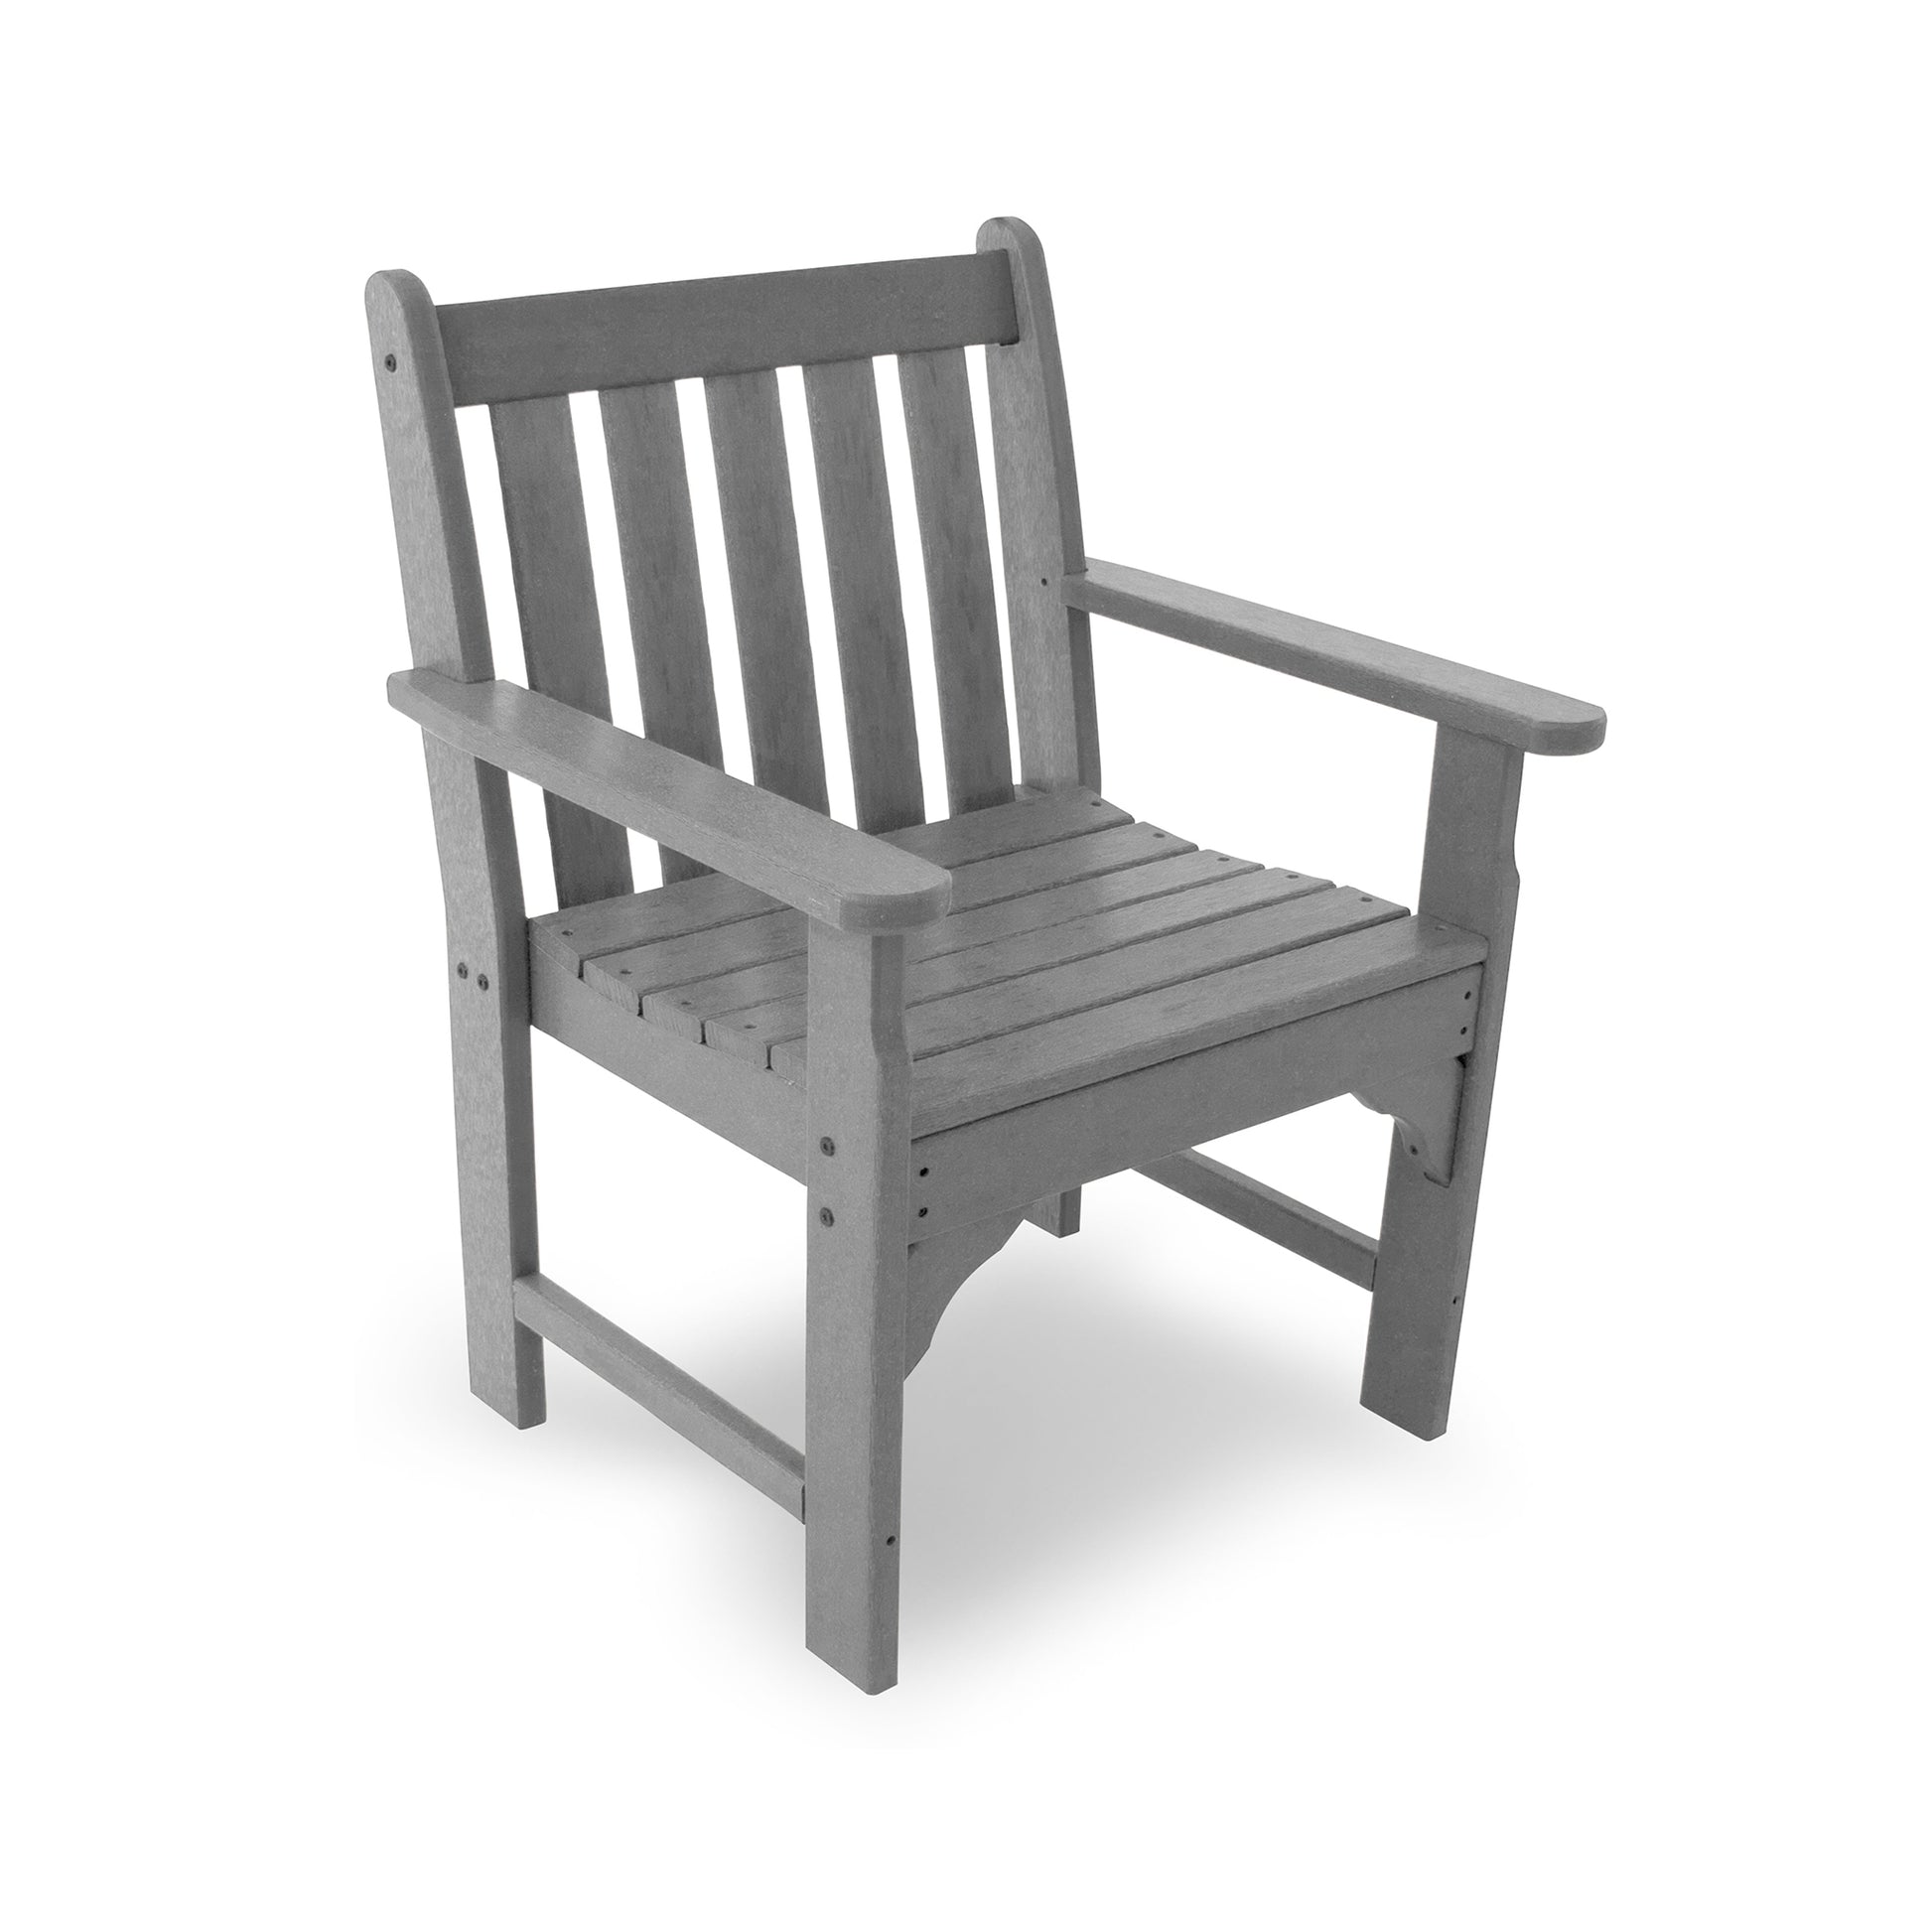 A gray POLYWOOD Vineyard Arm Chair isolated on a white background, featuring a slatted design and armrests.